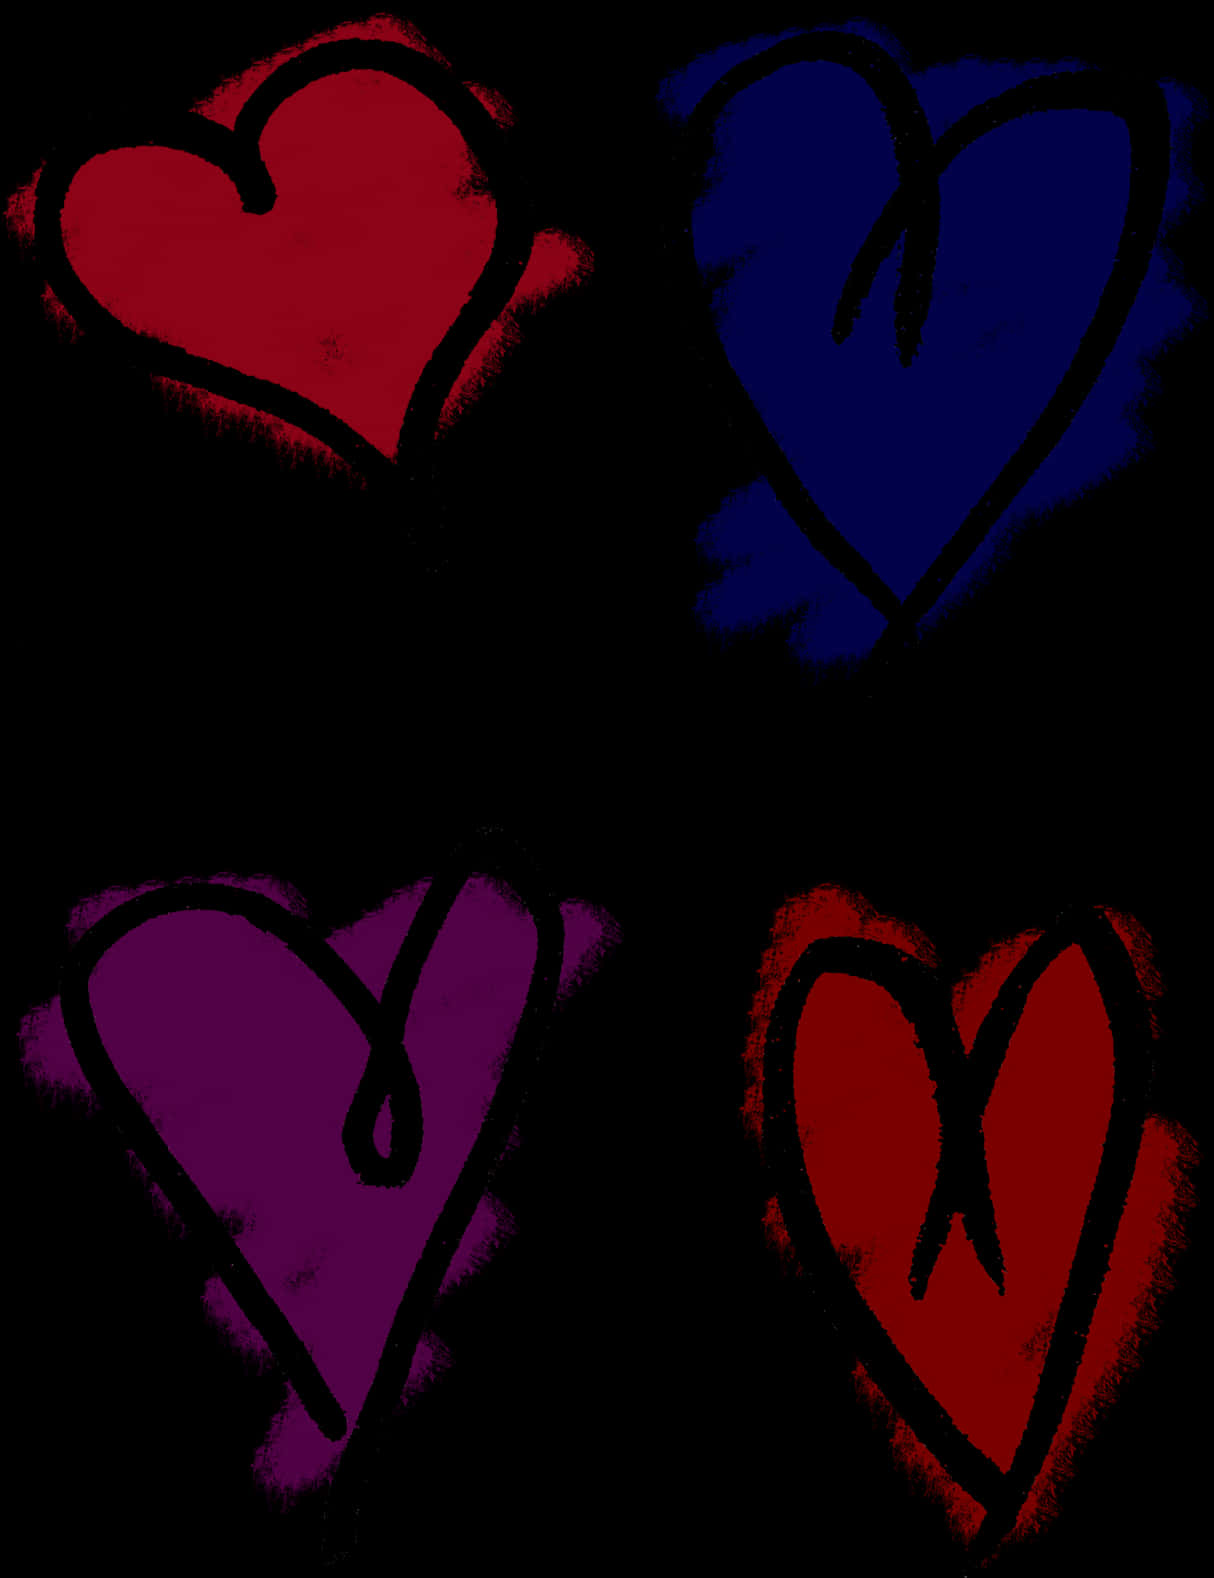 A Group Of Hearts Drawn On A Black Background